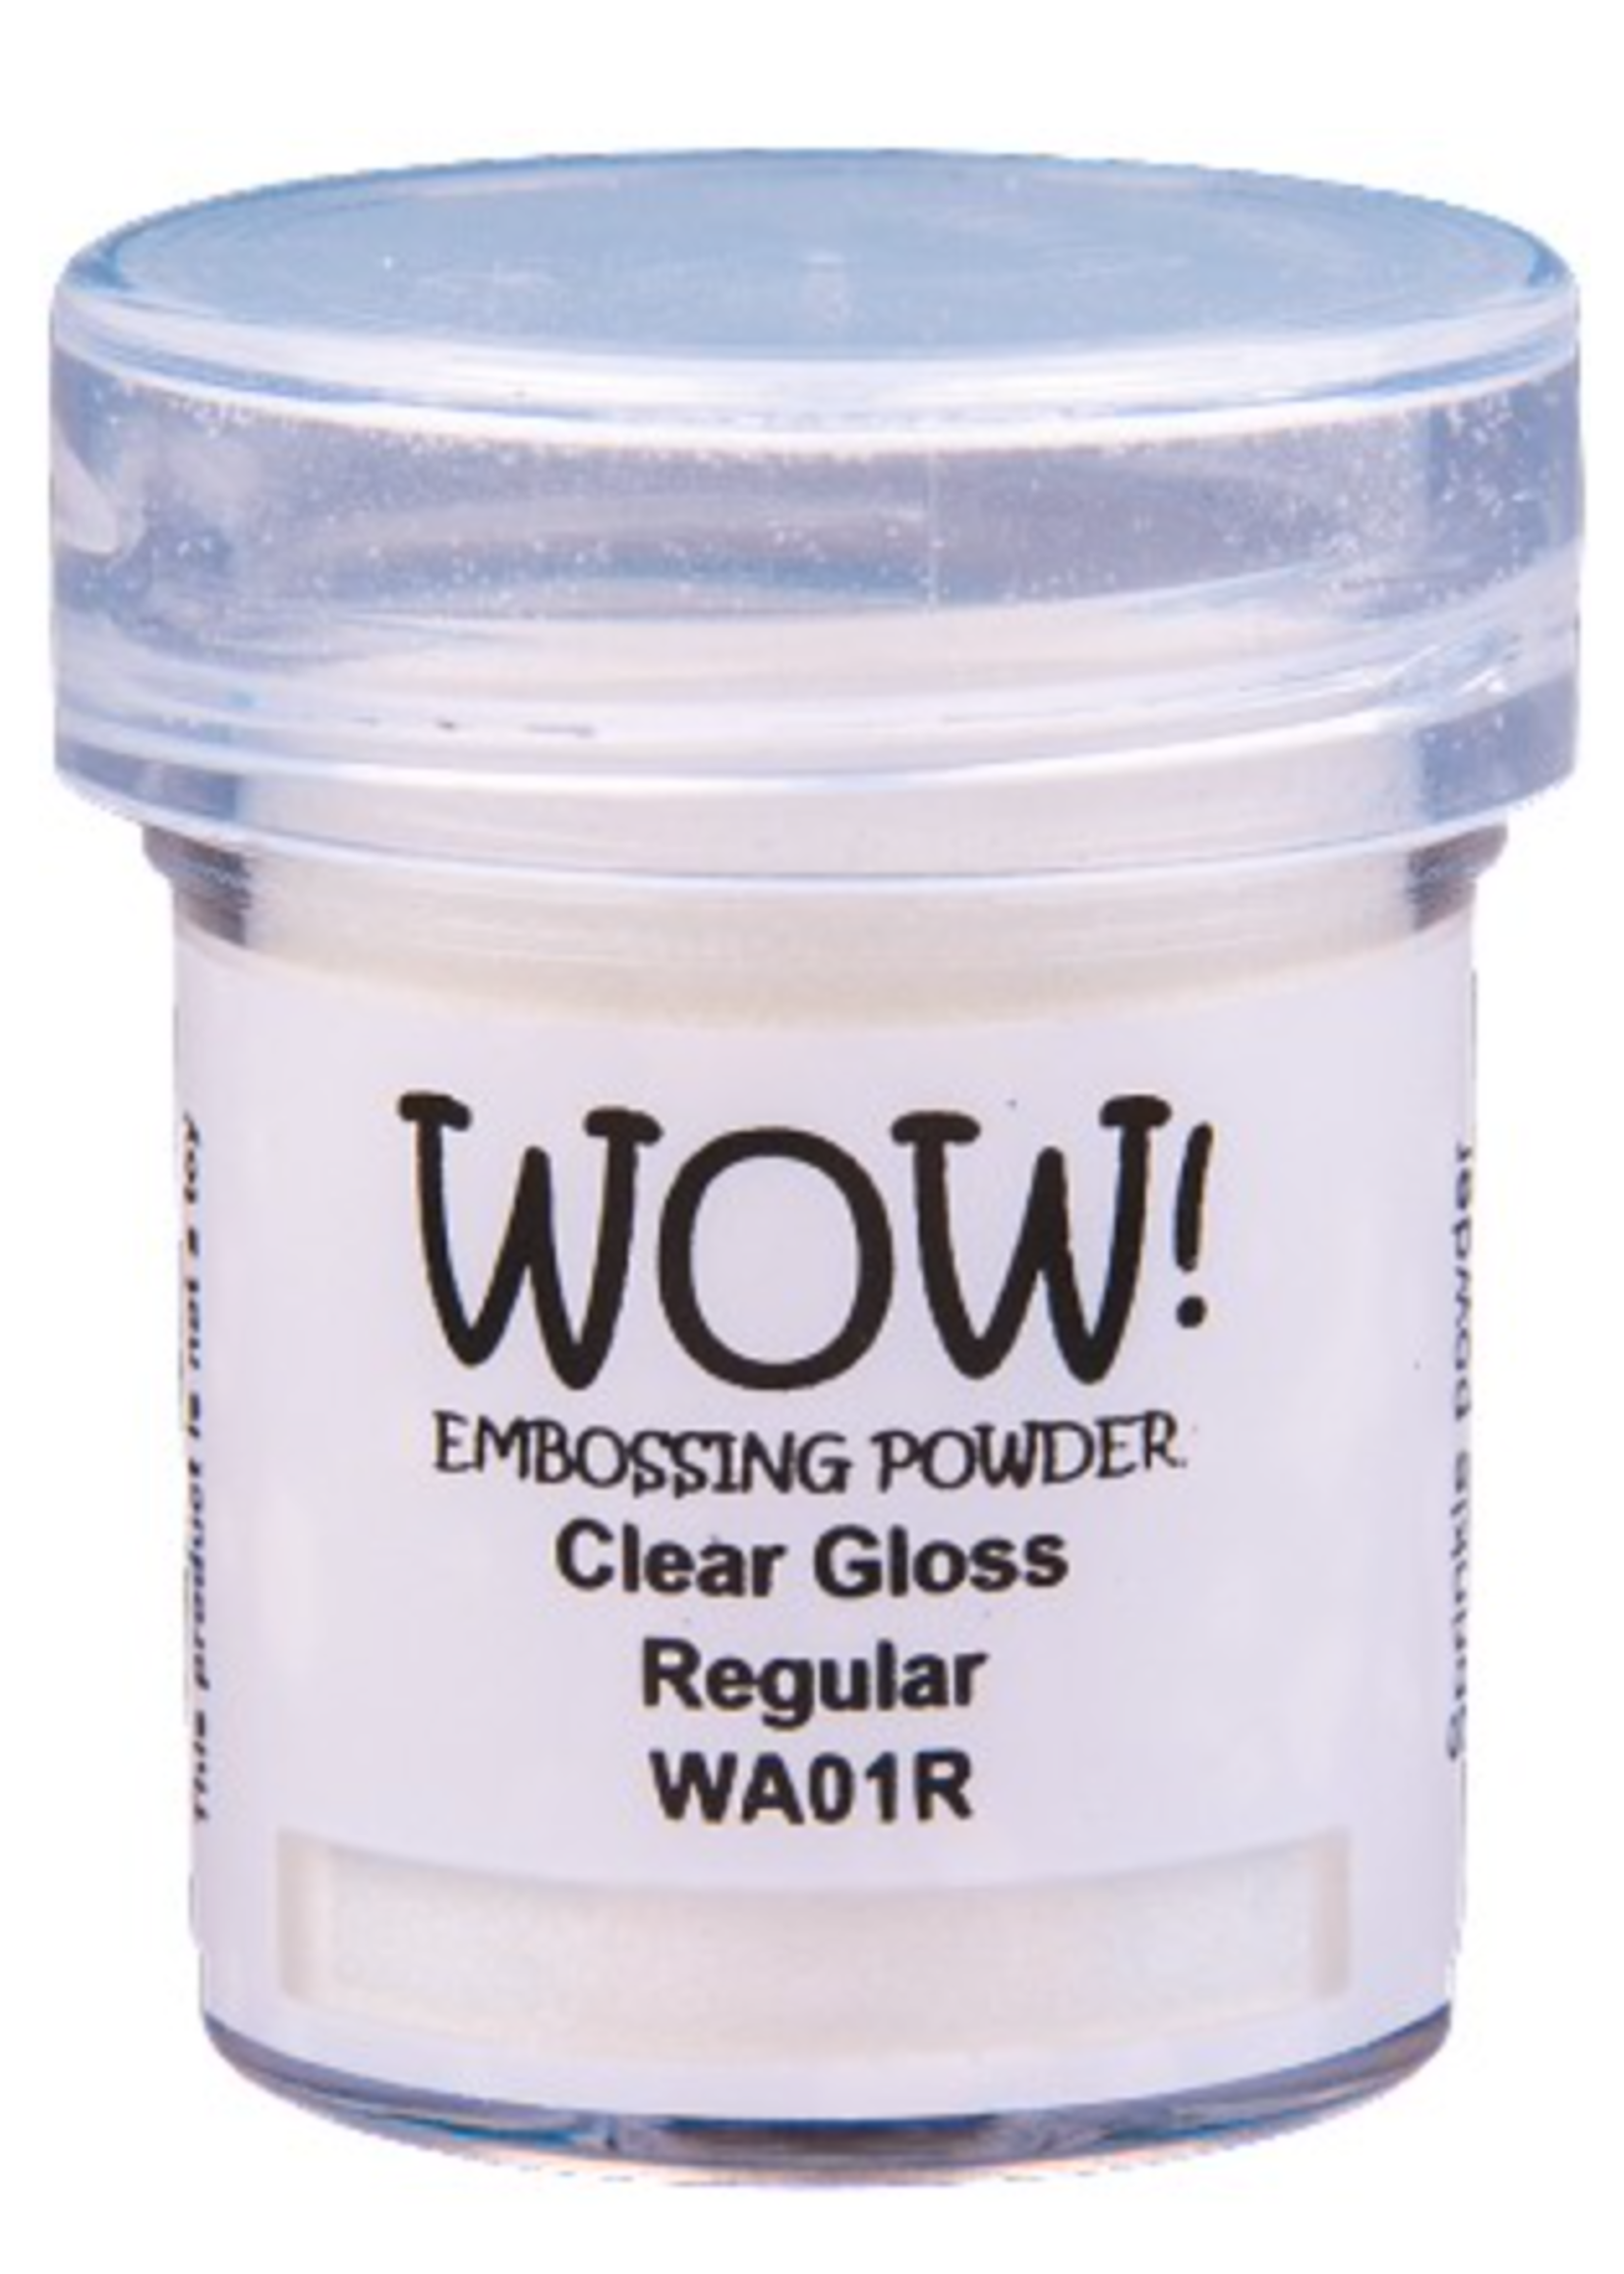 wow! Wow! Embossing Powder Clear Gloss - Regular - Creative Escape